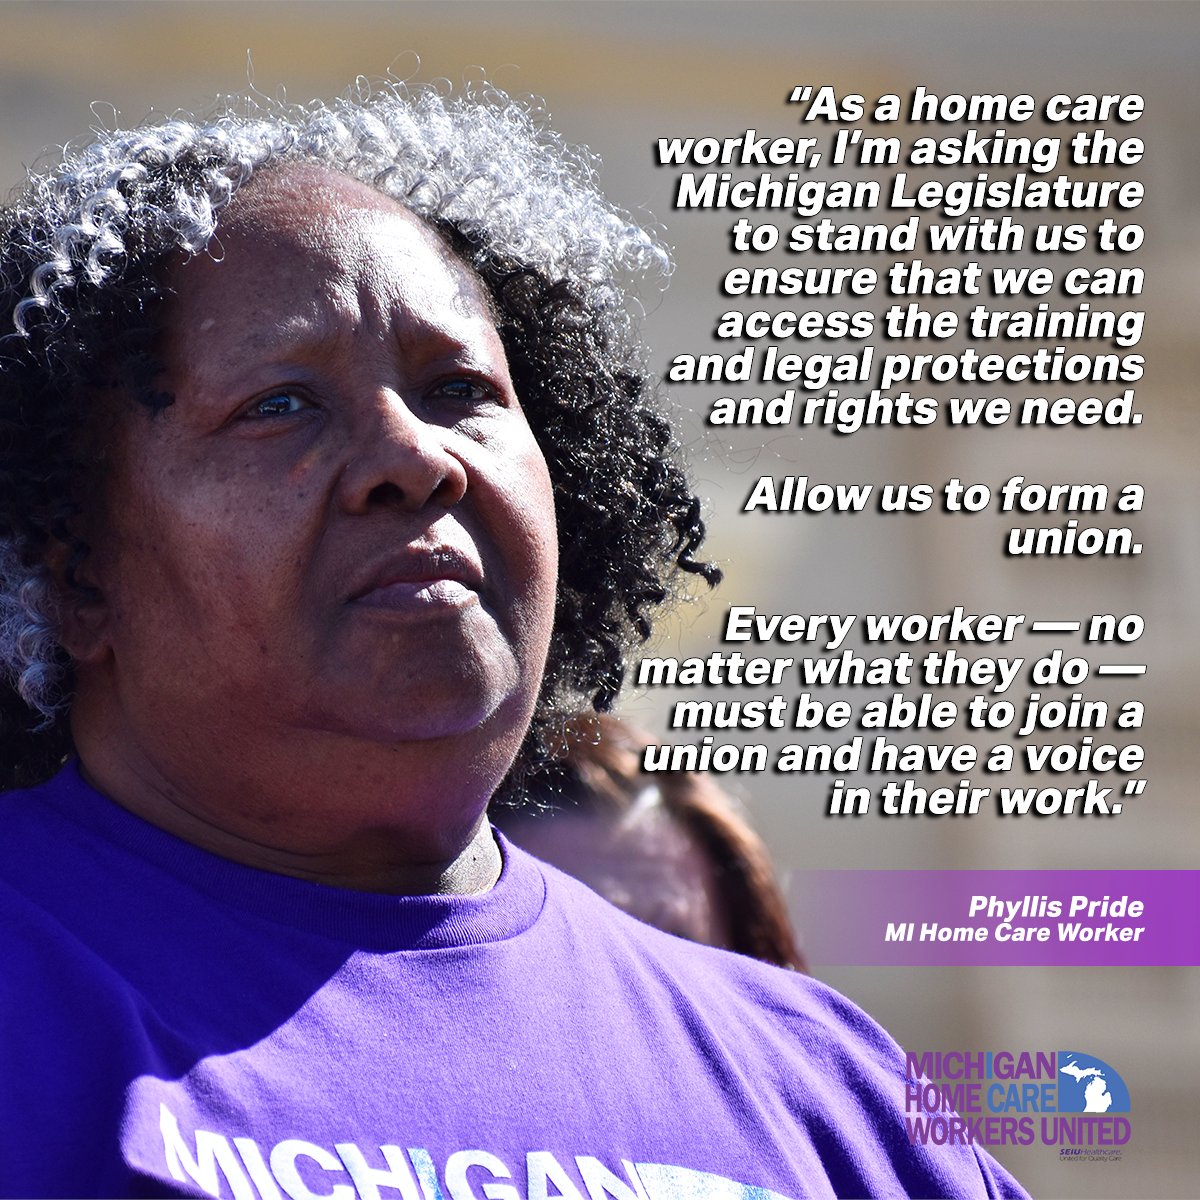 Disability & senior rights advocates say Senate Bills 790 and 791 would help address a growing & important need: good union jobs for home care workers in Michigan.

It's time we #SupportHomeCareWorkers #MIHomeCareWorkersUnited #UnionsForAll bit.ly/3TDEWAe